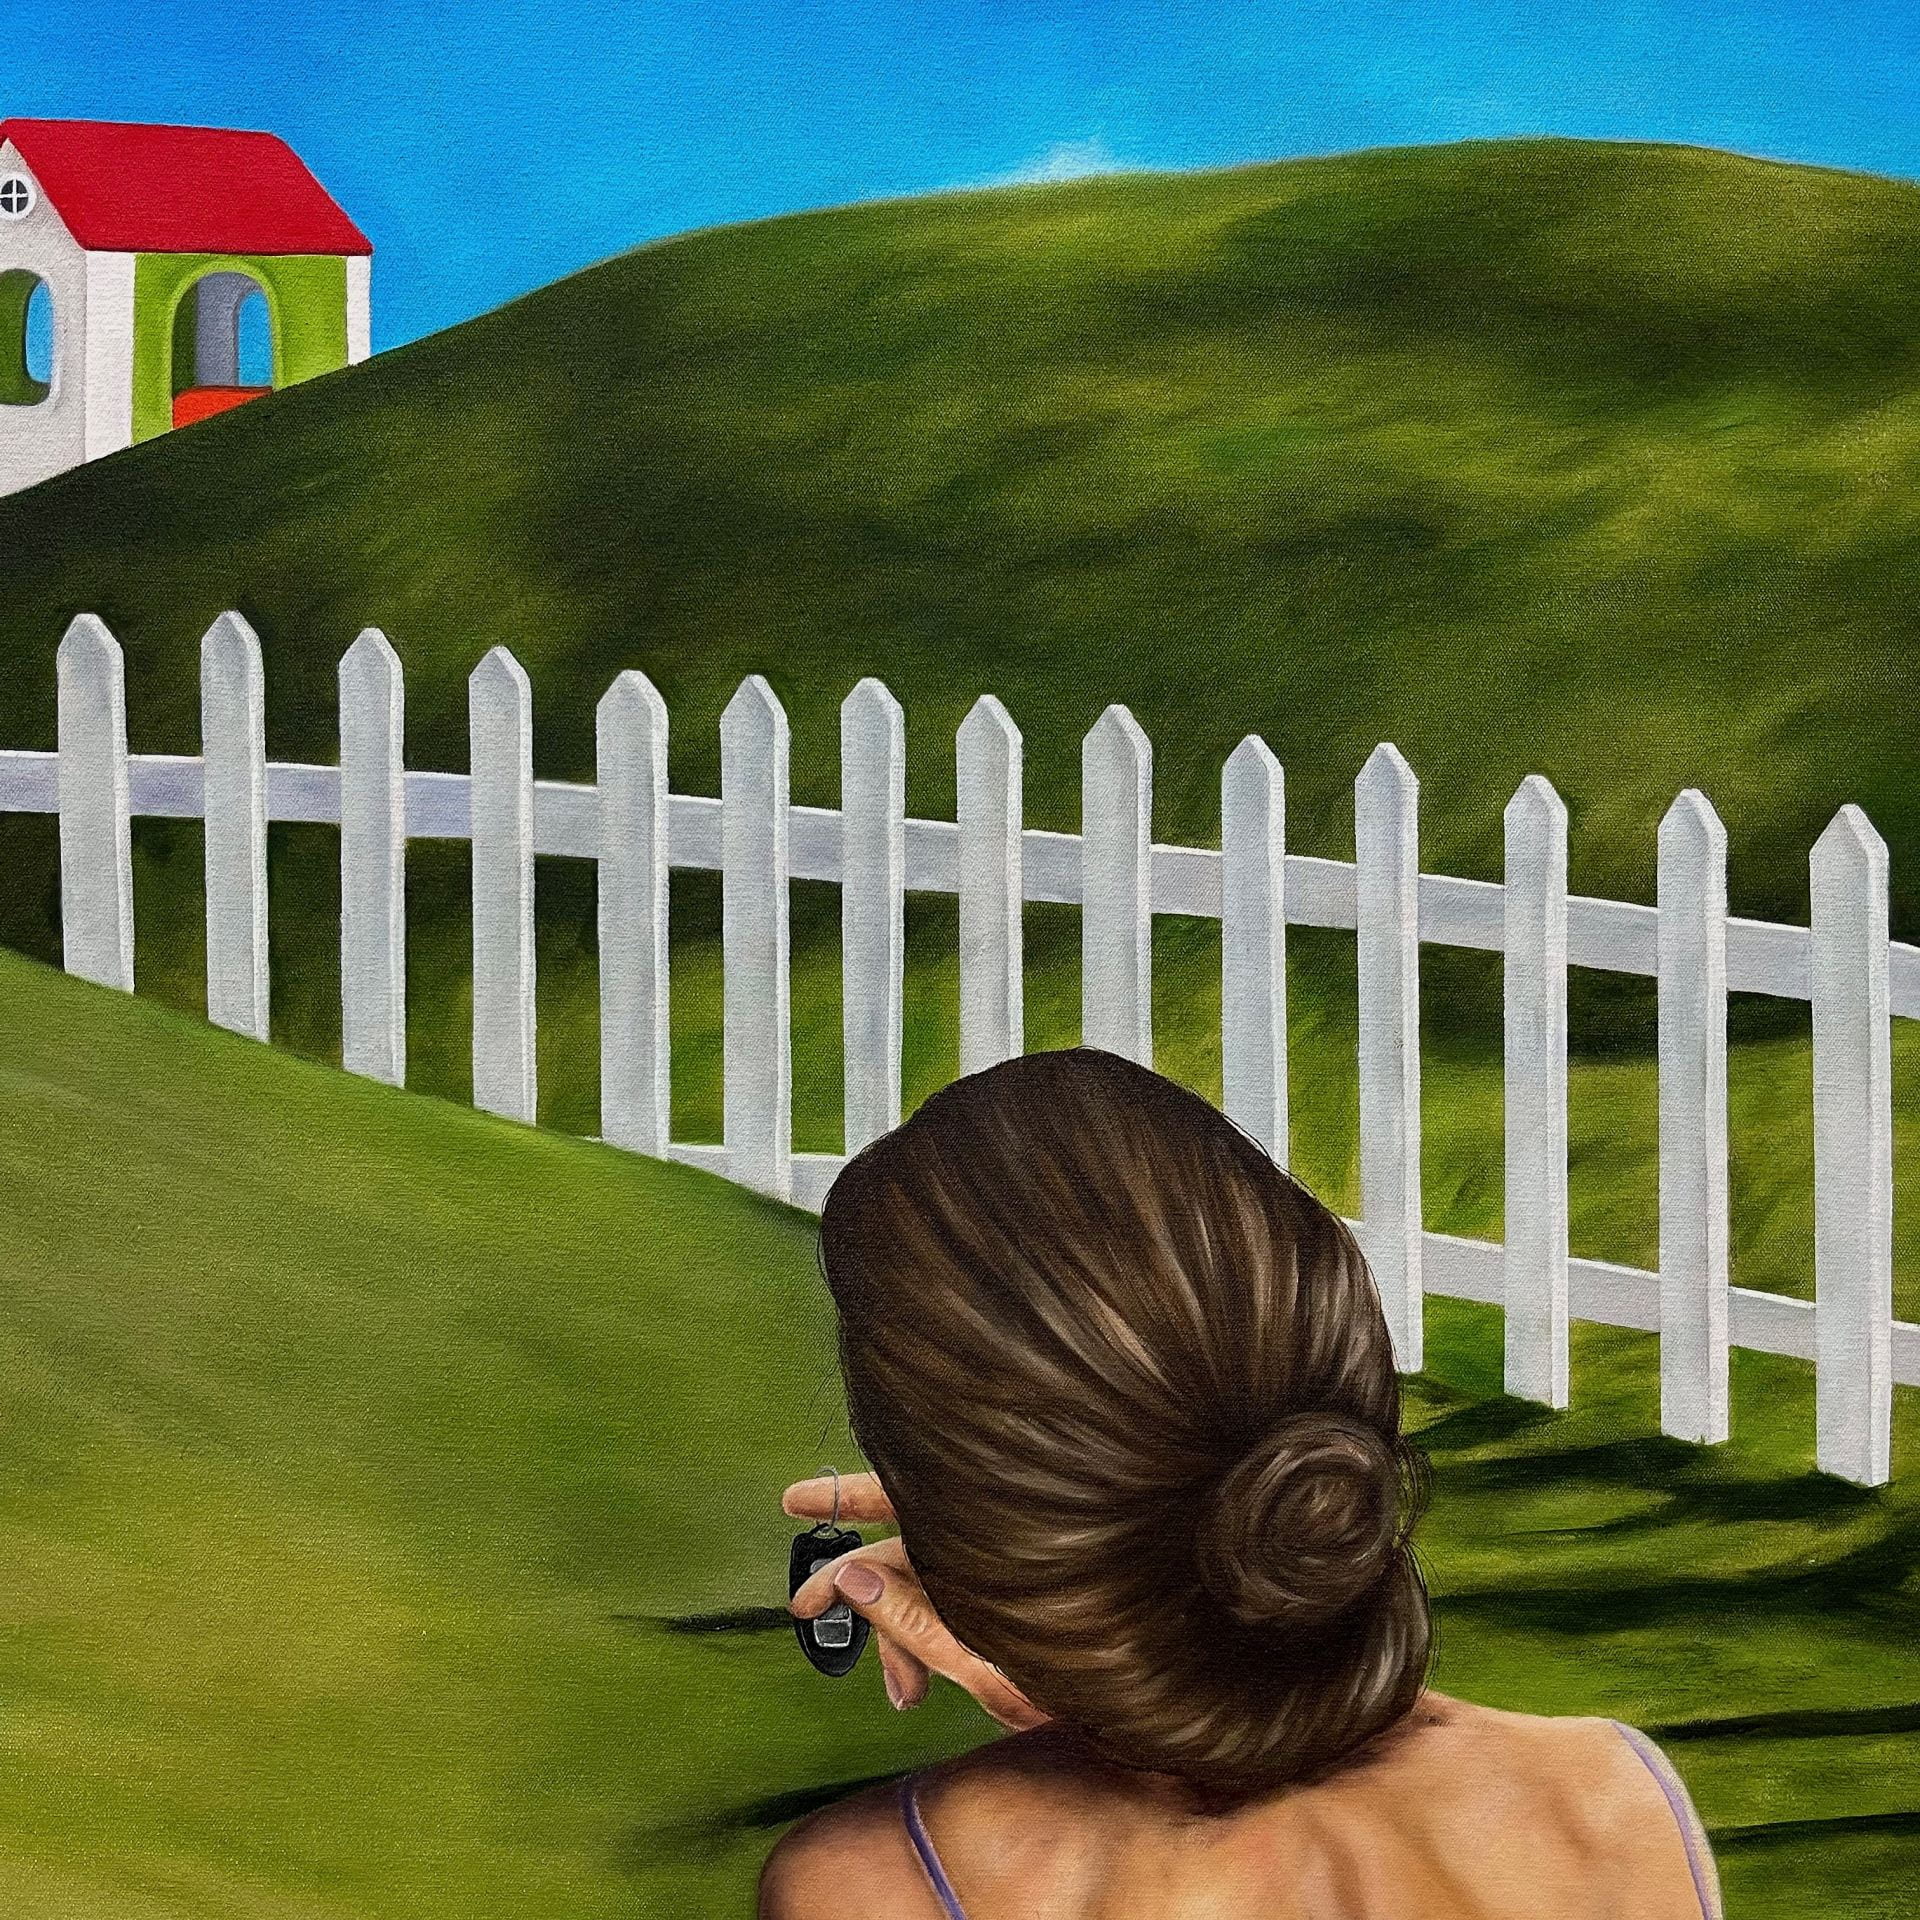 A painting of the back of a woman in a grassy landscape, holding a pair of carkeys.